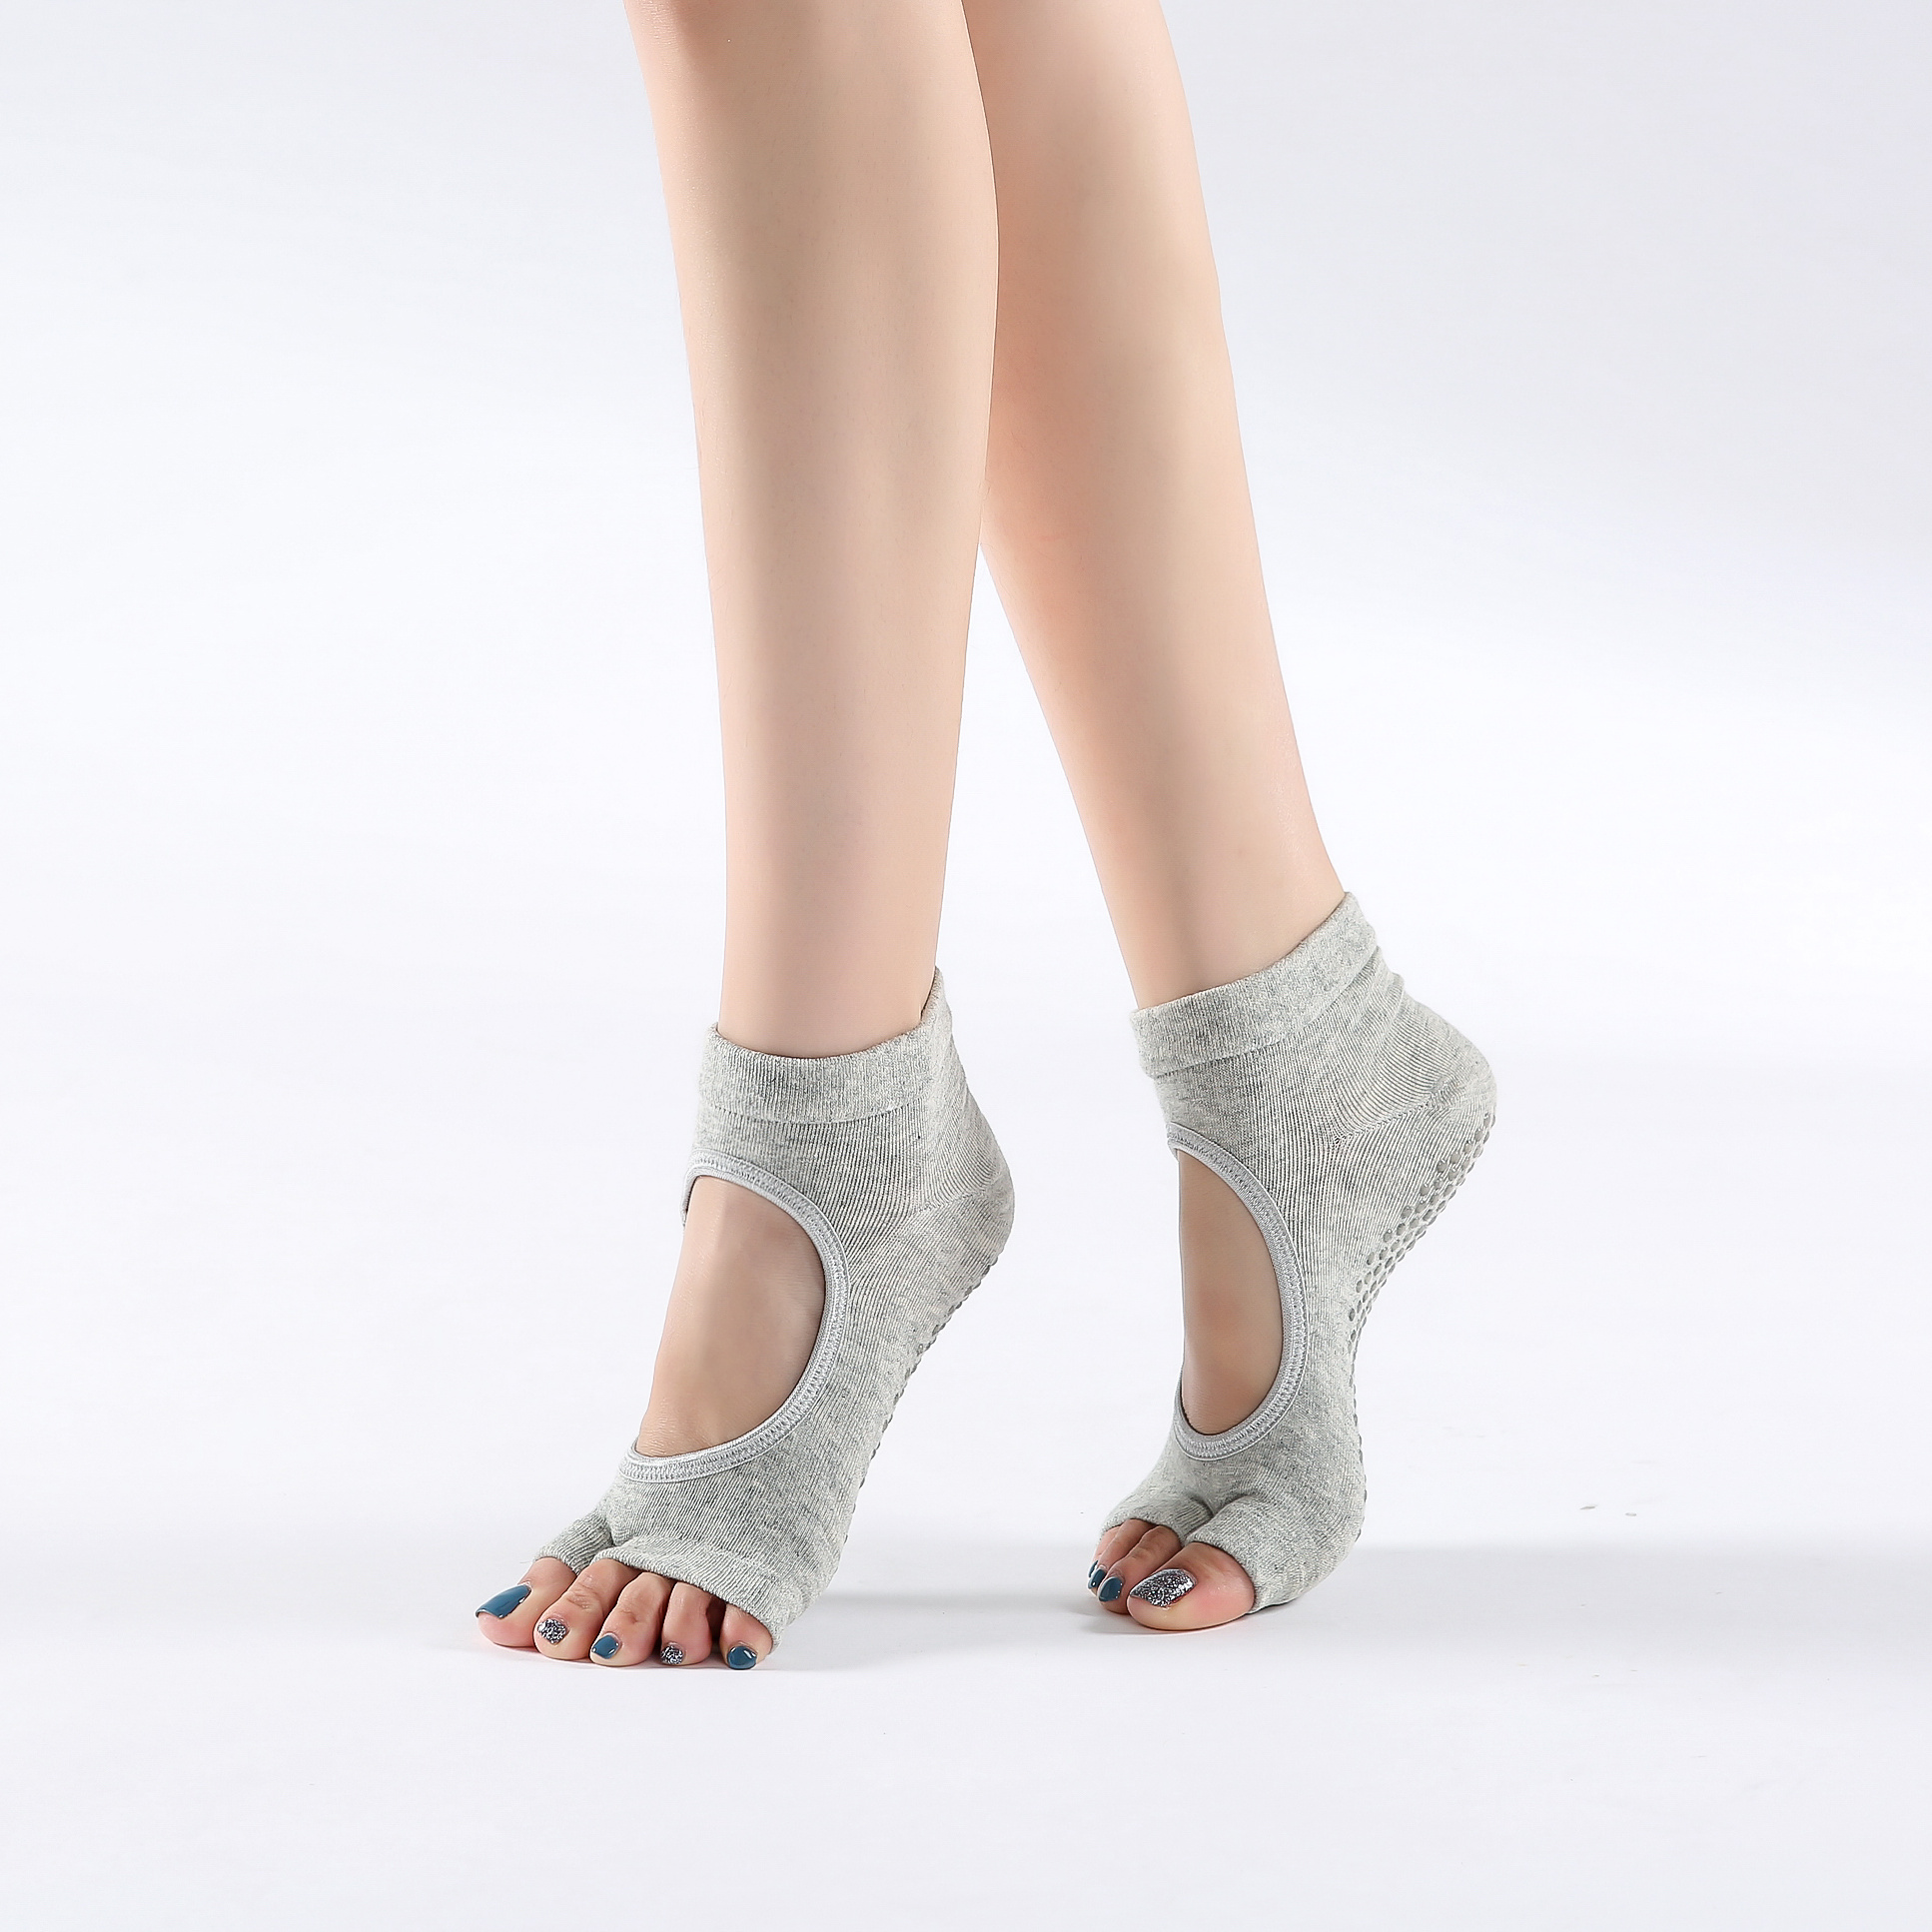 Womens Split Toe Yoga Socks No Toes With Slippery Open Back And Open Finger  Design For Pilates And Dance From Dickssportingsneaker, $4.05